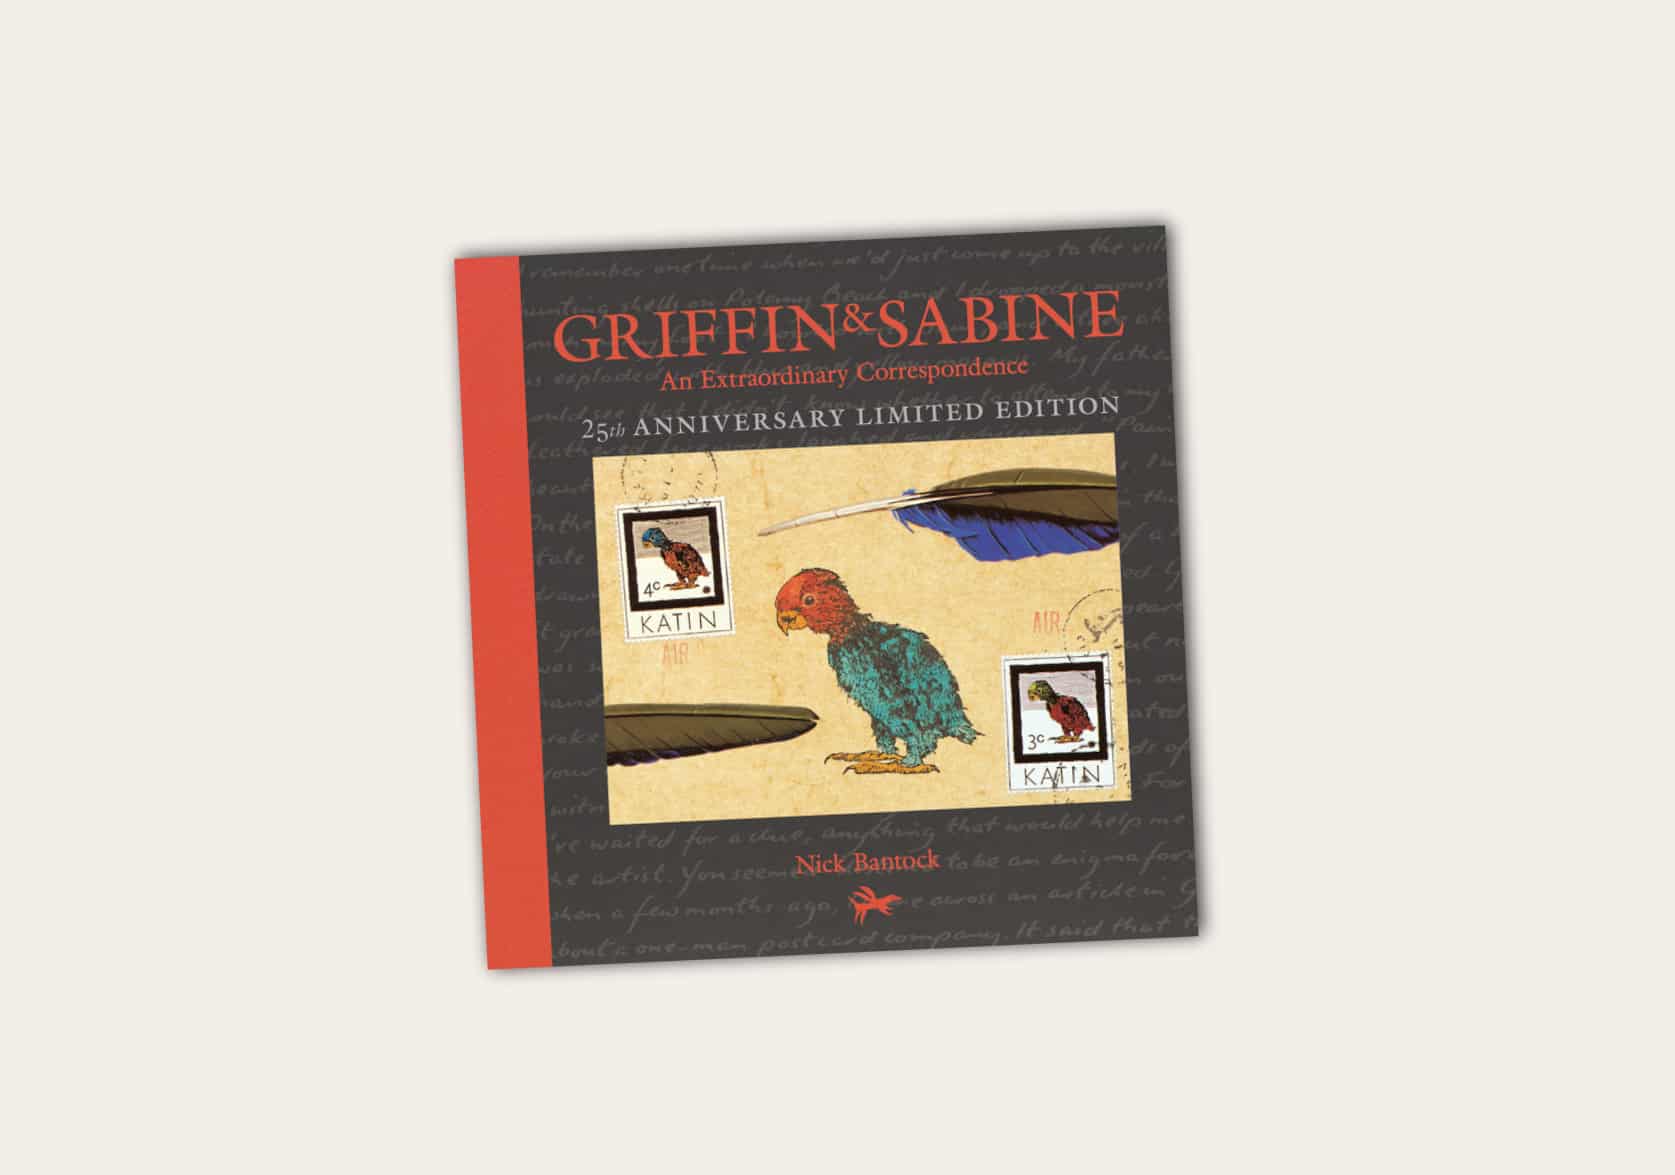 Griffin and Sabine: An Extraordinary Correspondence by Nick Bantock. 25th Anniversary Limited Edition.